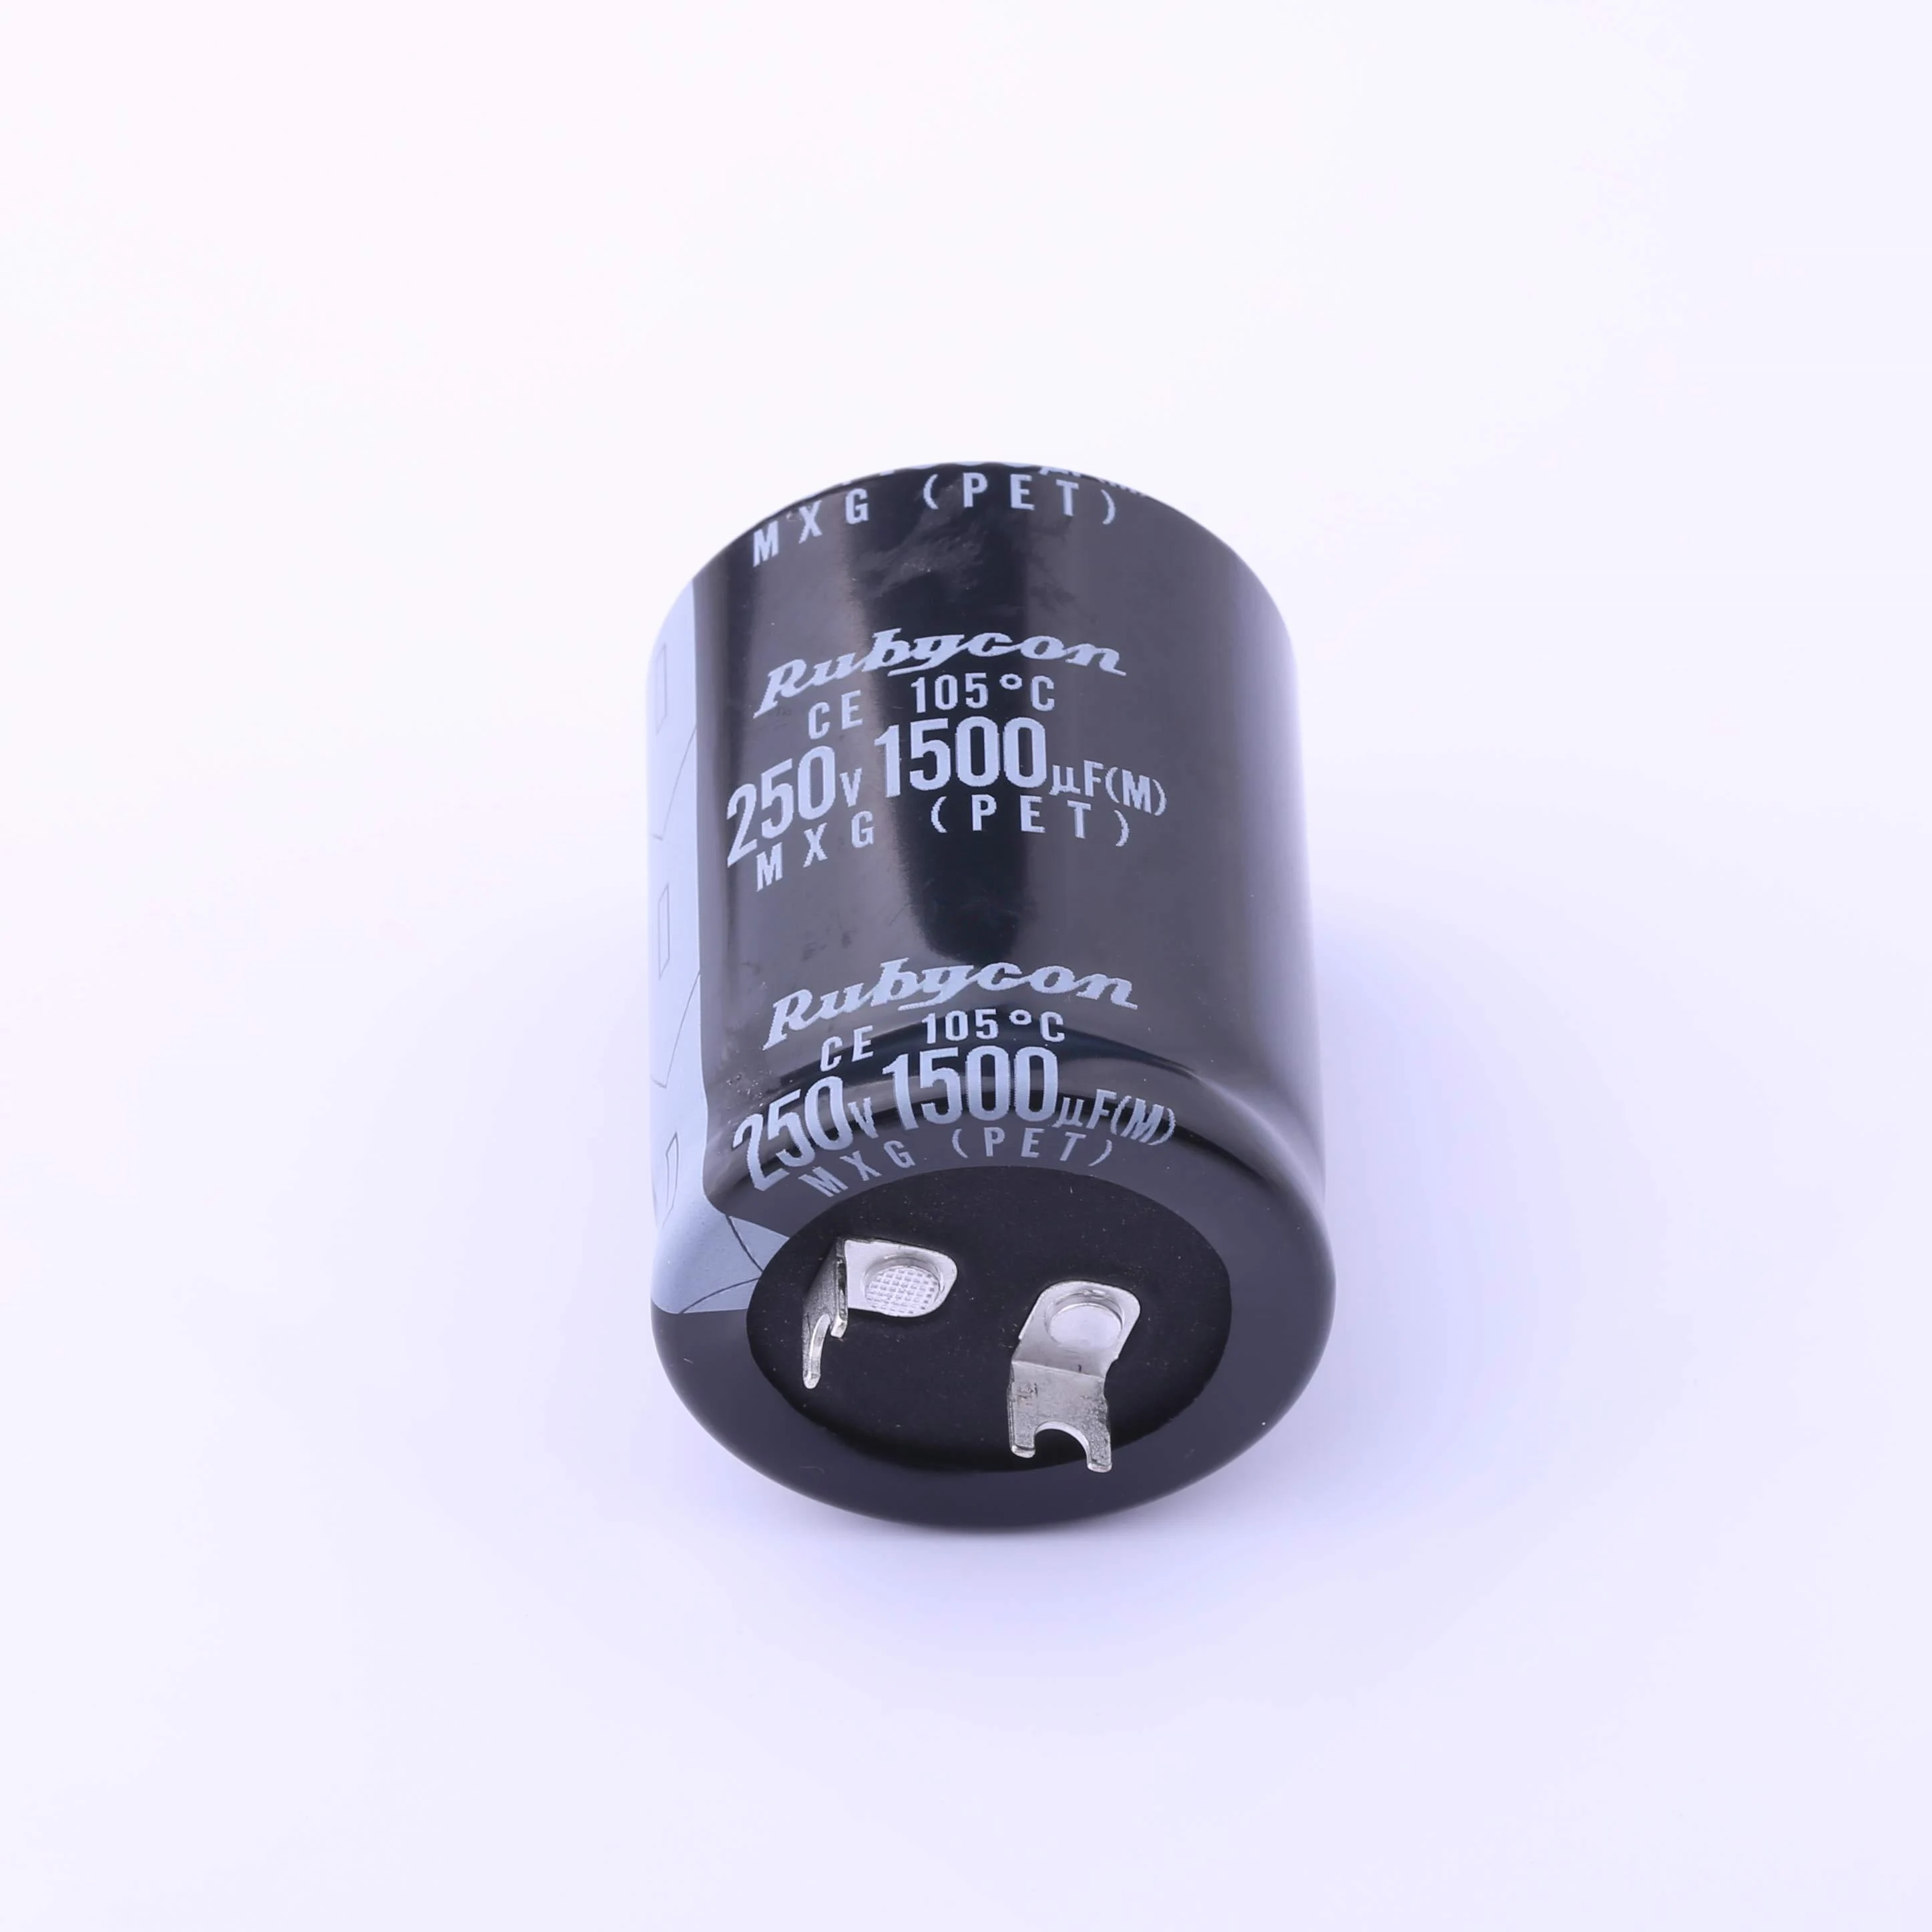 250MXG1500MLCALN35X45 (1500uF ±20% 250V) horn electrolytic capacitor